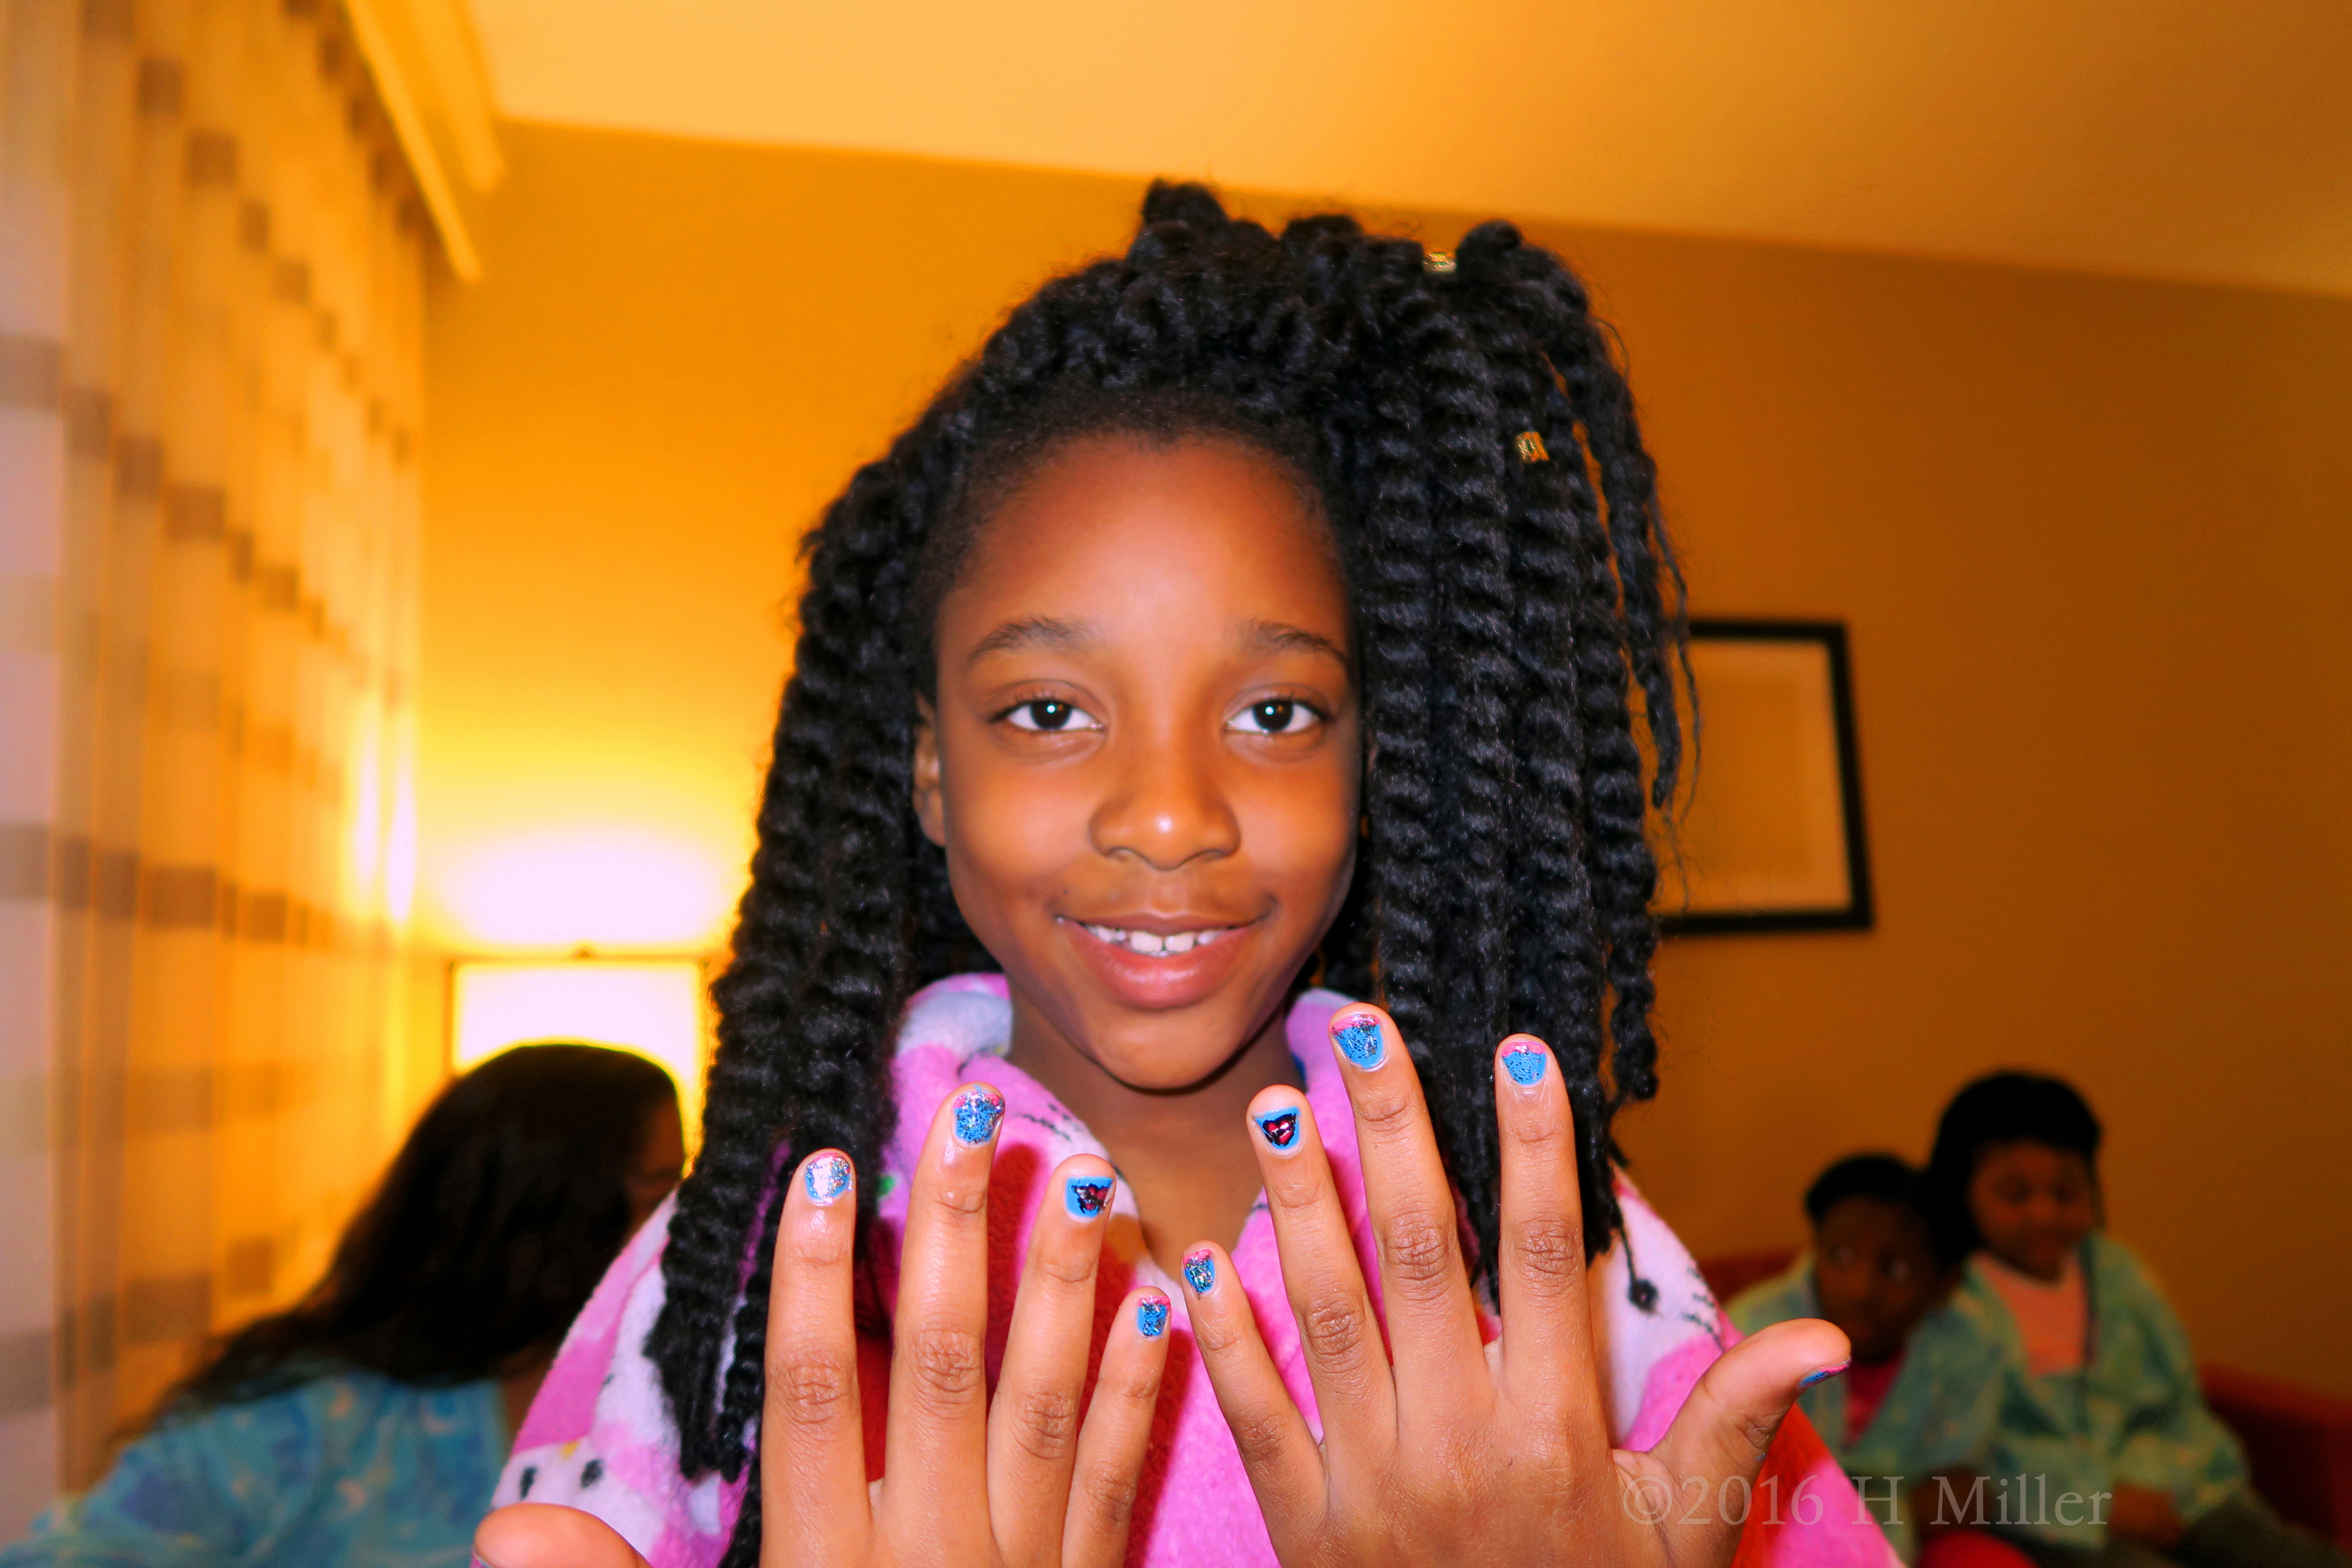 Showing Us Her Cool French Mani With Unqiue Color Pattern And Heart Tattoo Graphics. 